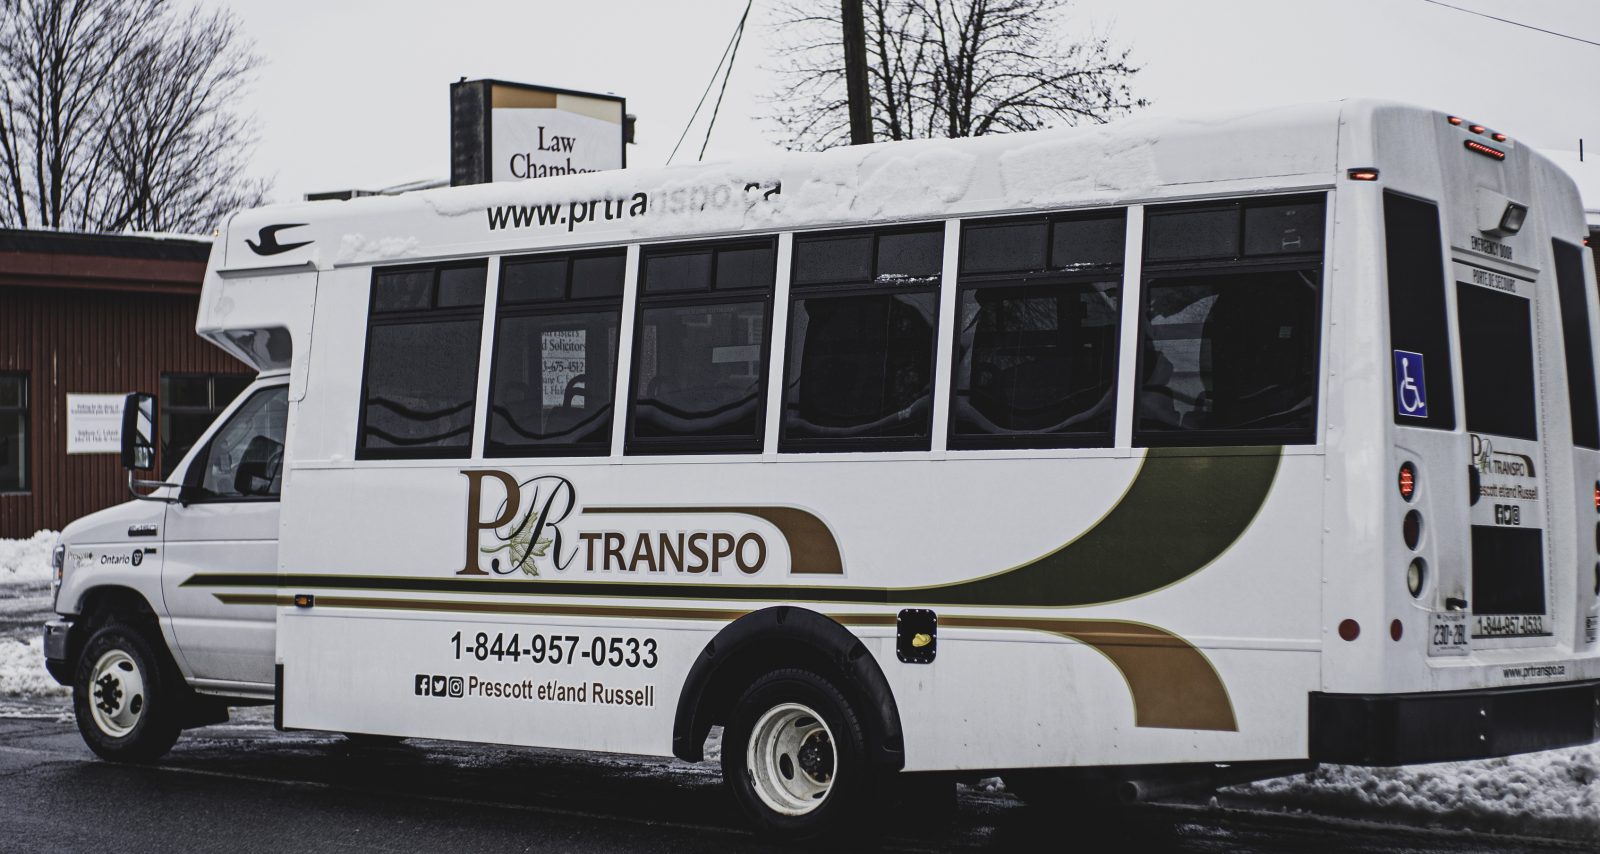 Update due on transpo service